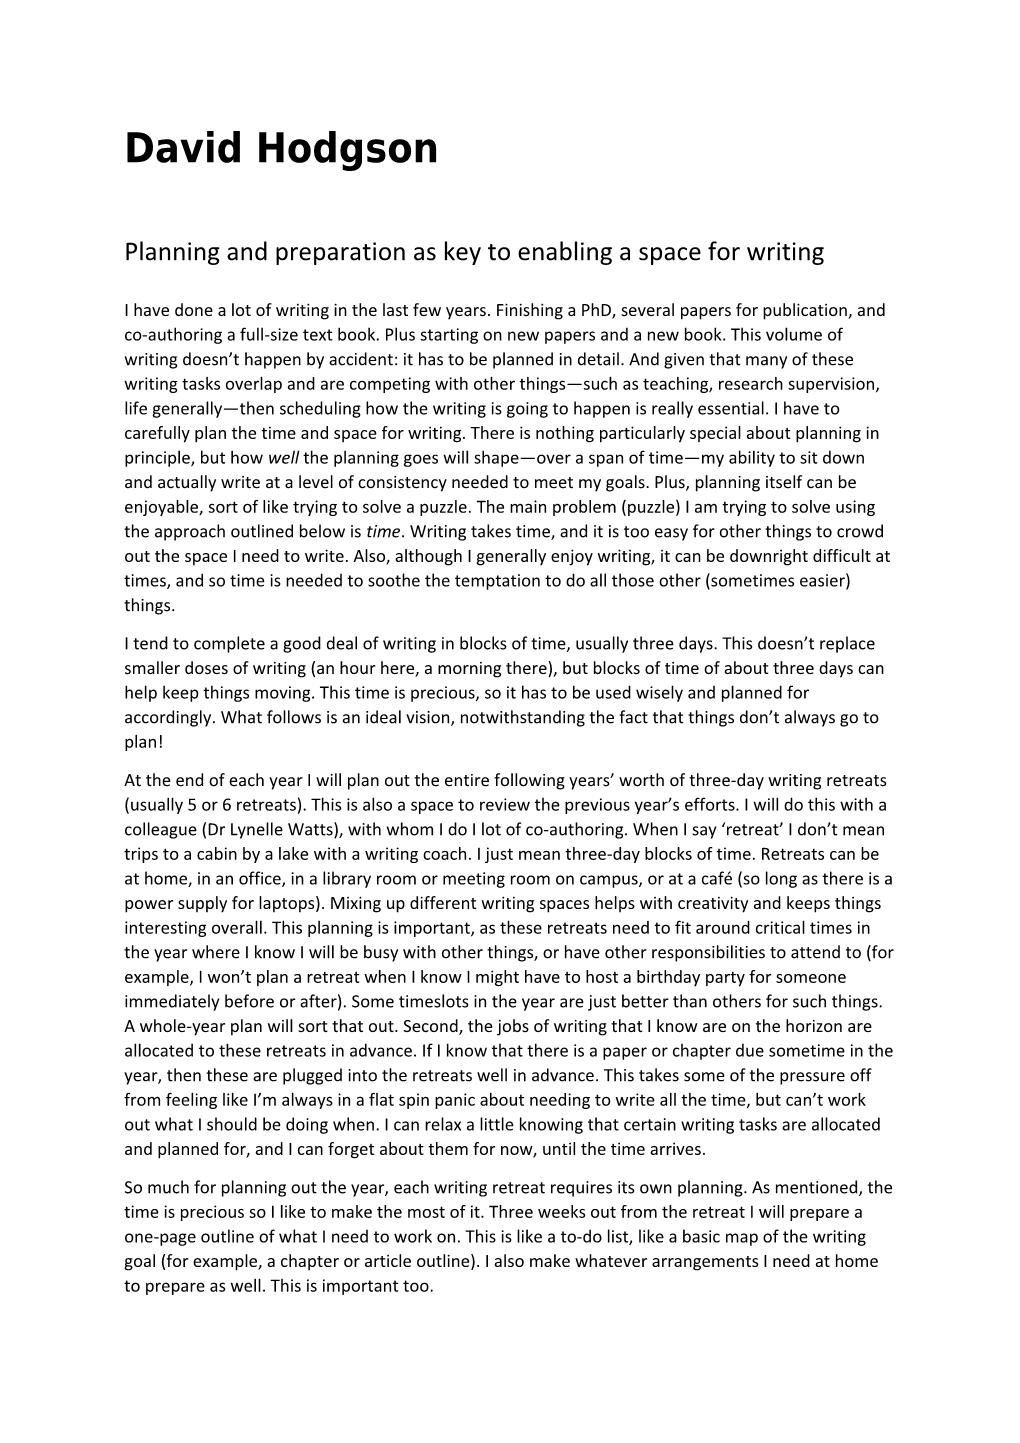 Planning and Preparation As Key to Enabling a Space for Writing